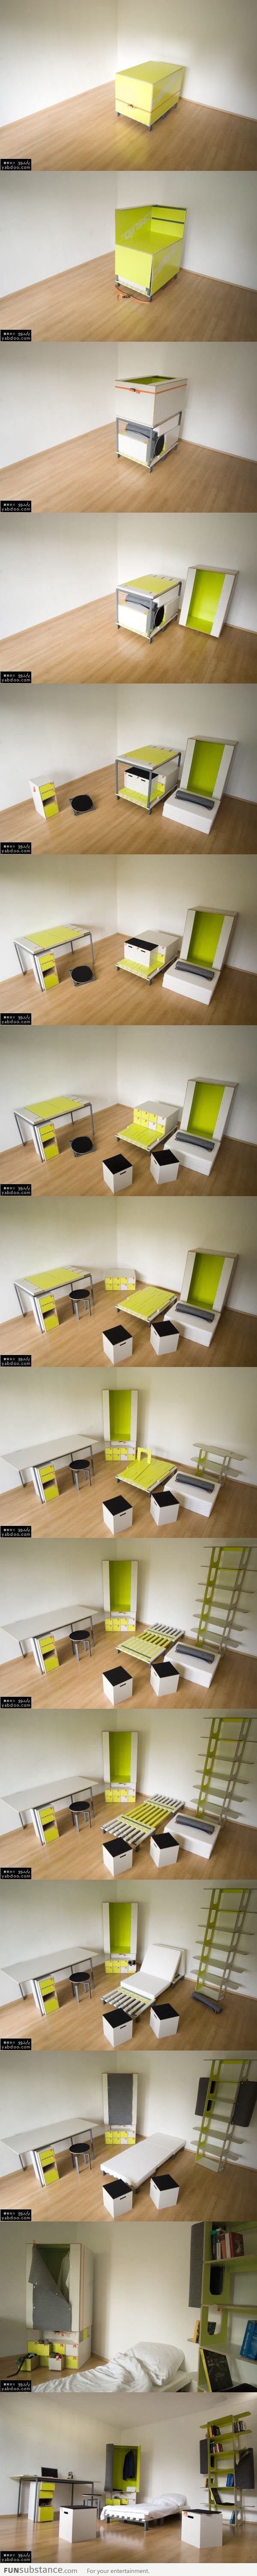 A Whole Room's Furniture In A Small Yellow Box